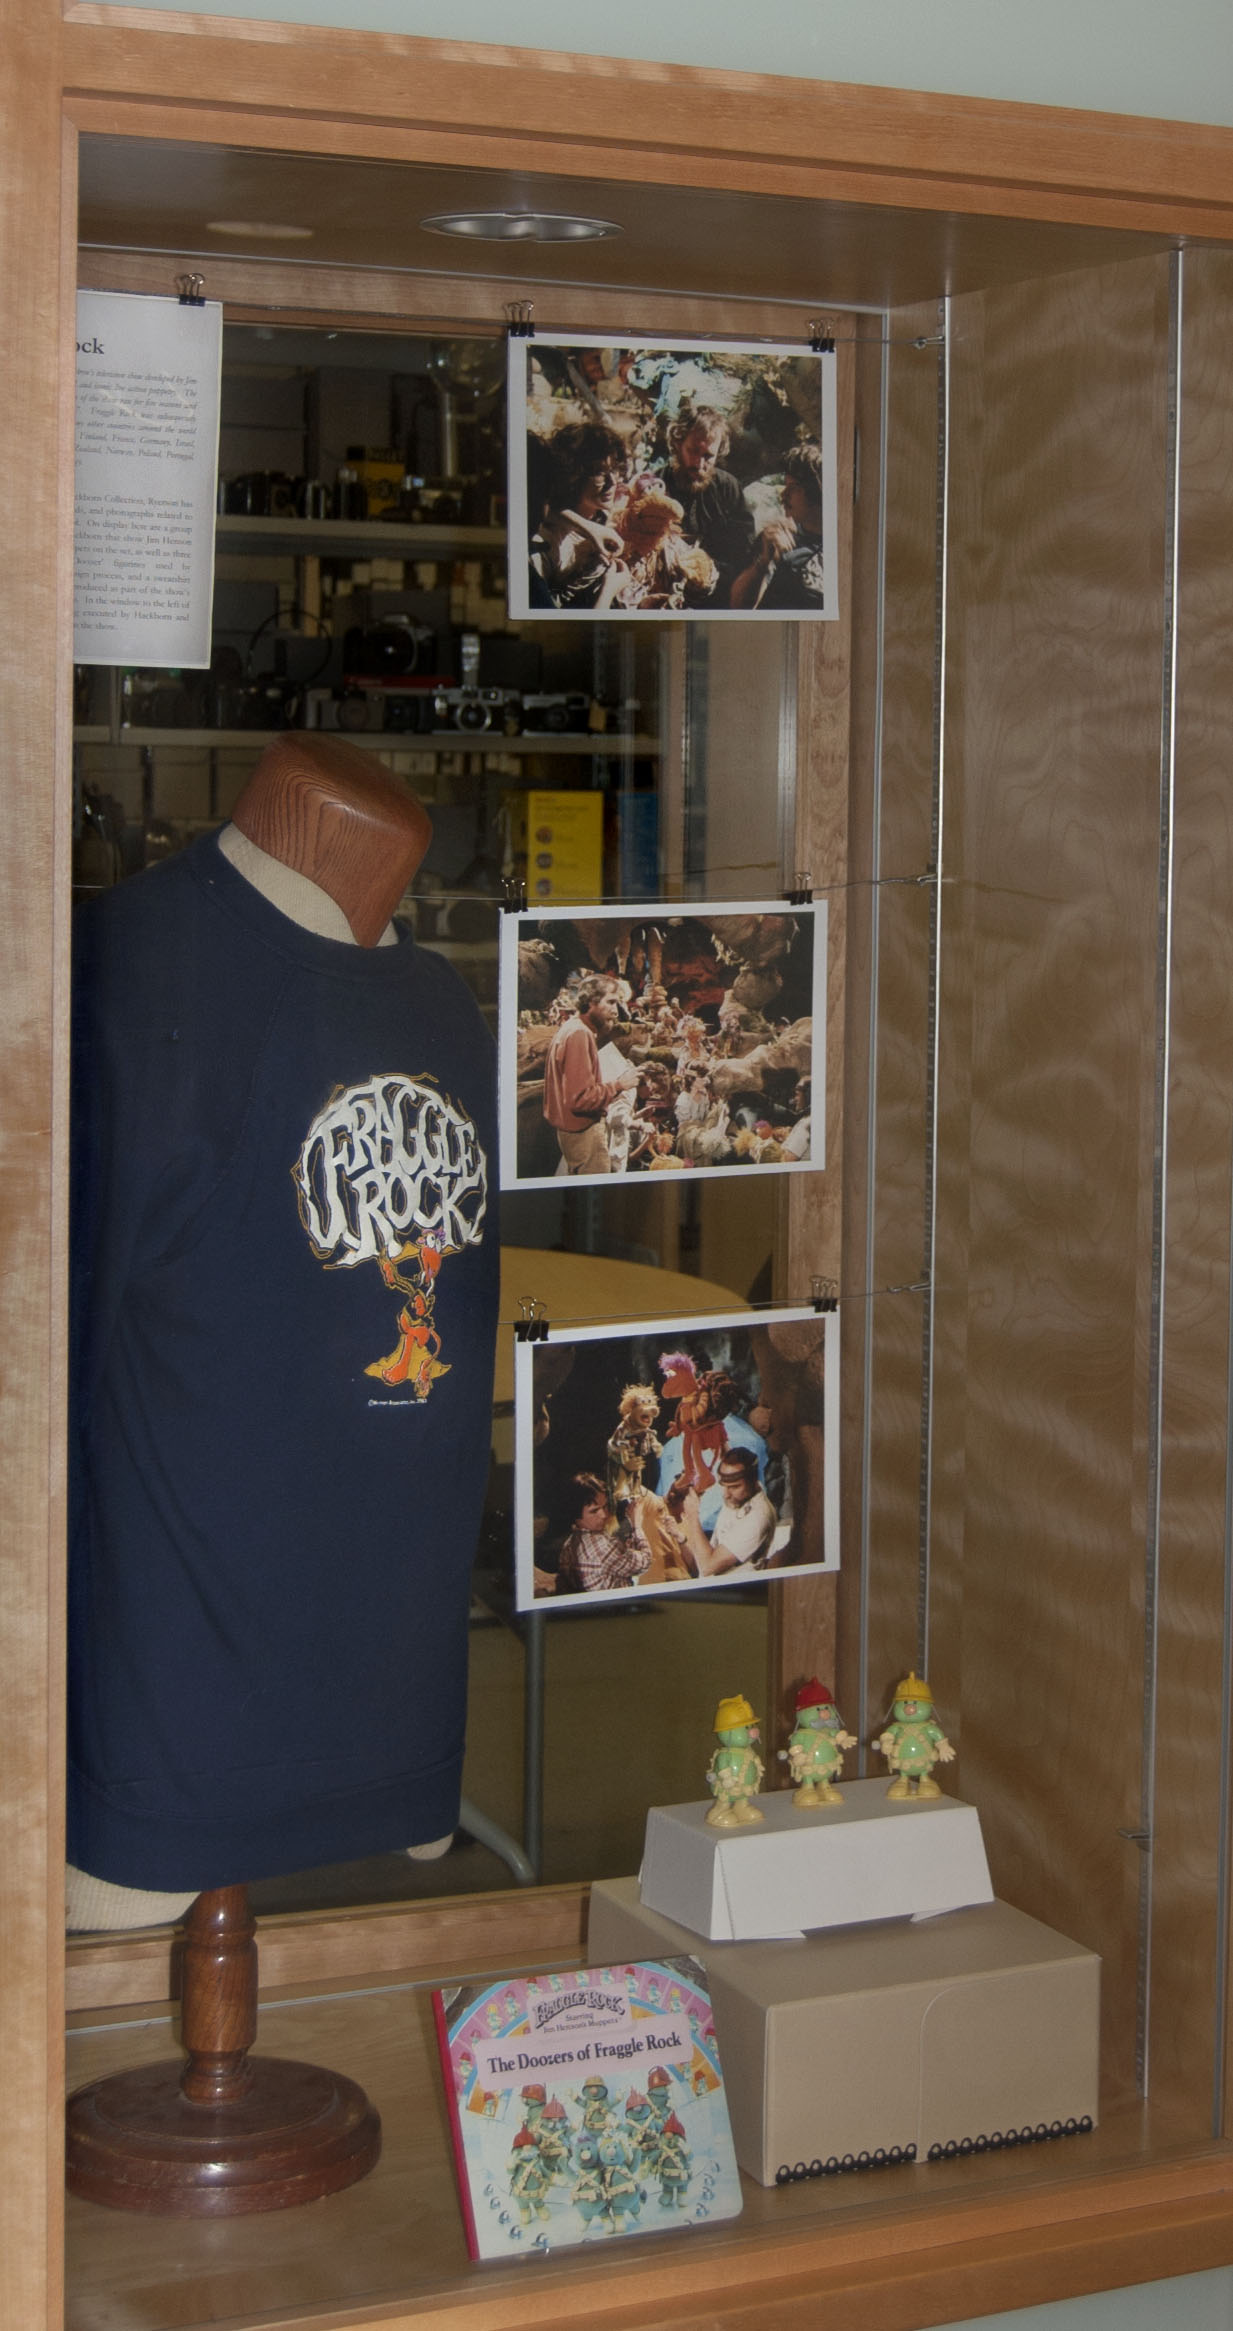 On display are a group of color photographs taken by Hackborn, a sweatshirt, a children’s picture book, and figurines related to the production of Fraggle Rock.